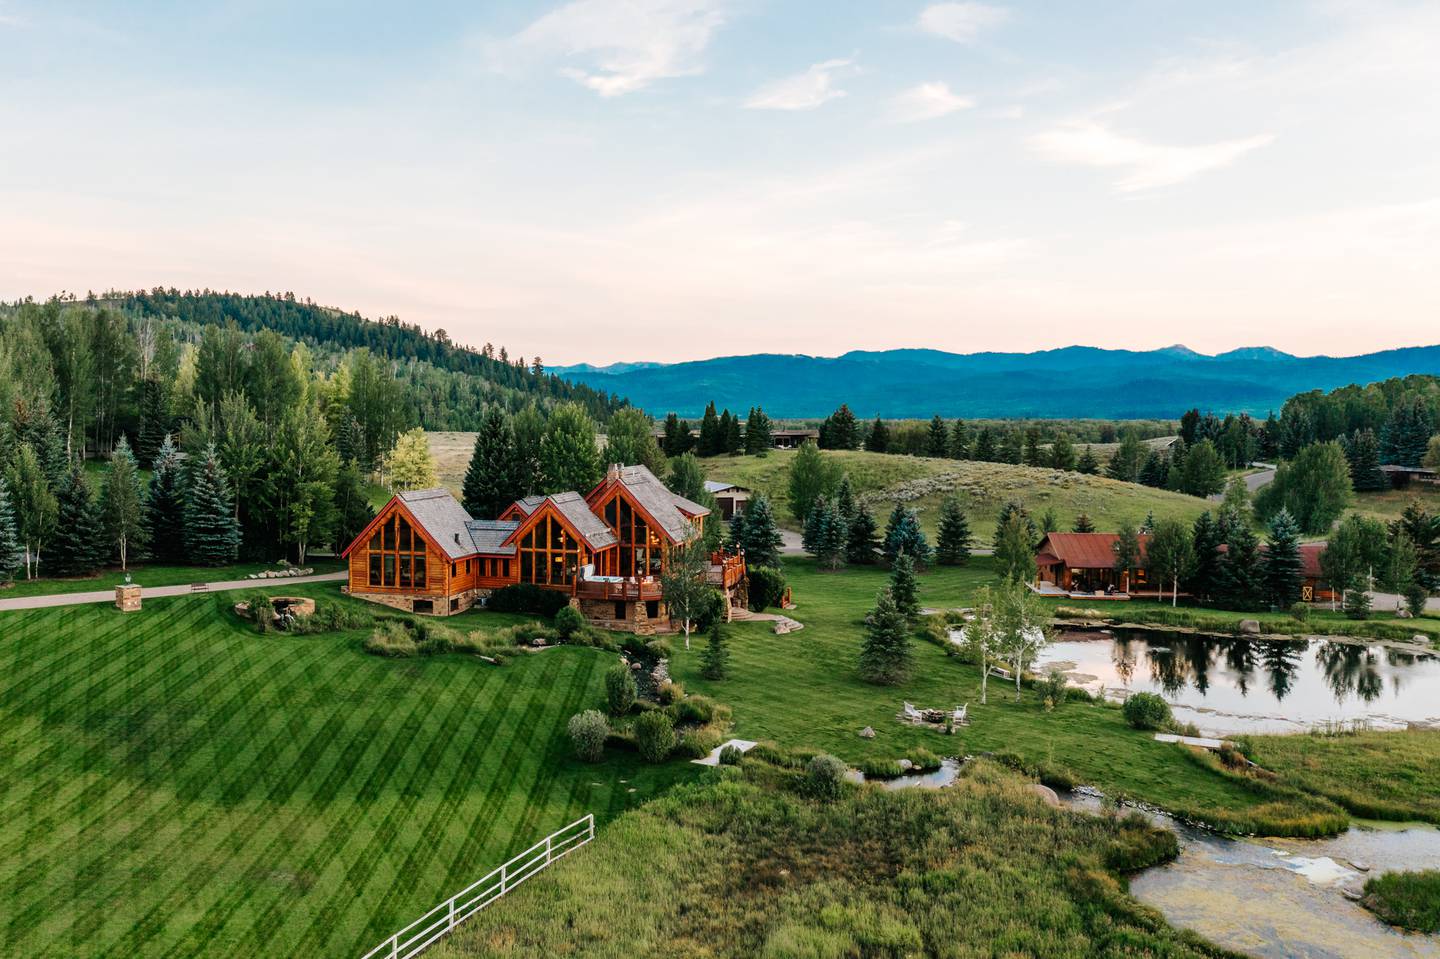 'Polar Express' ranch is set on a 2.8-hectare plot in Wyoming. Photo: Engel & Volkers